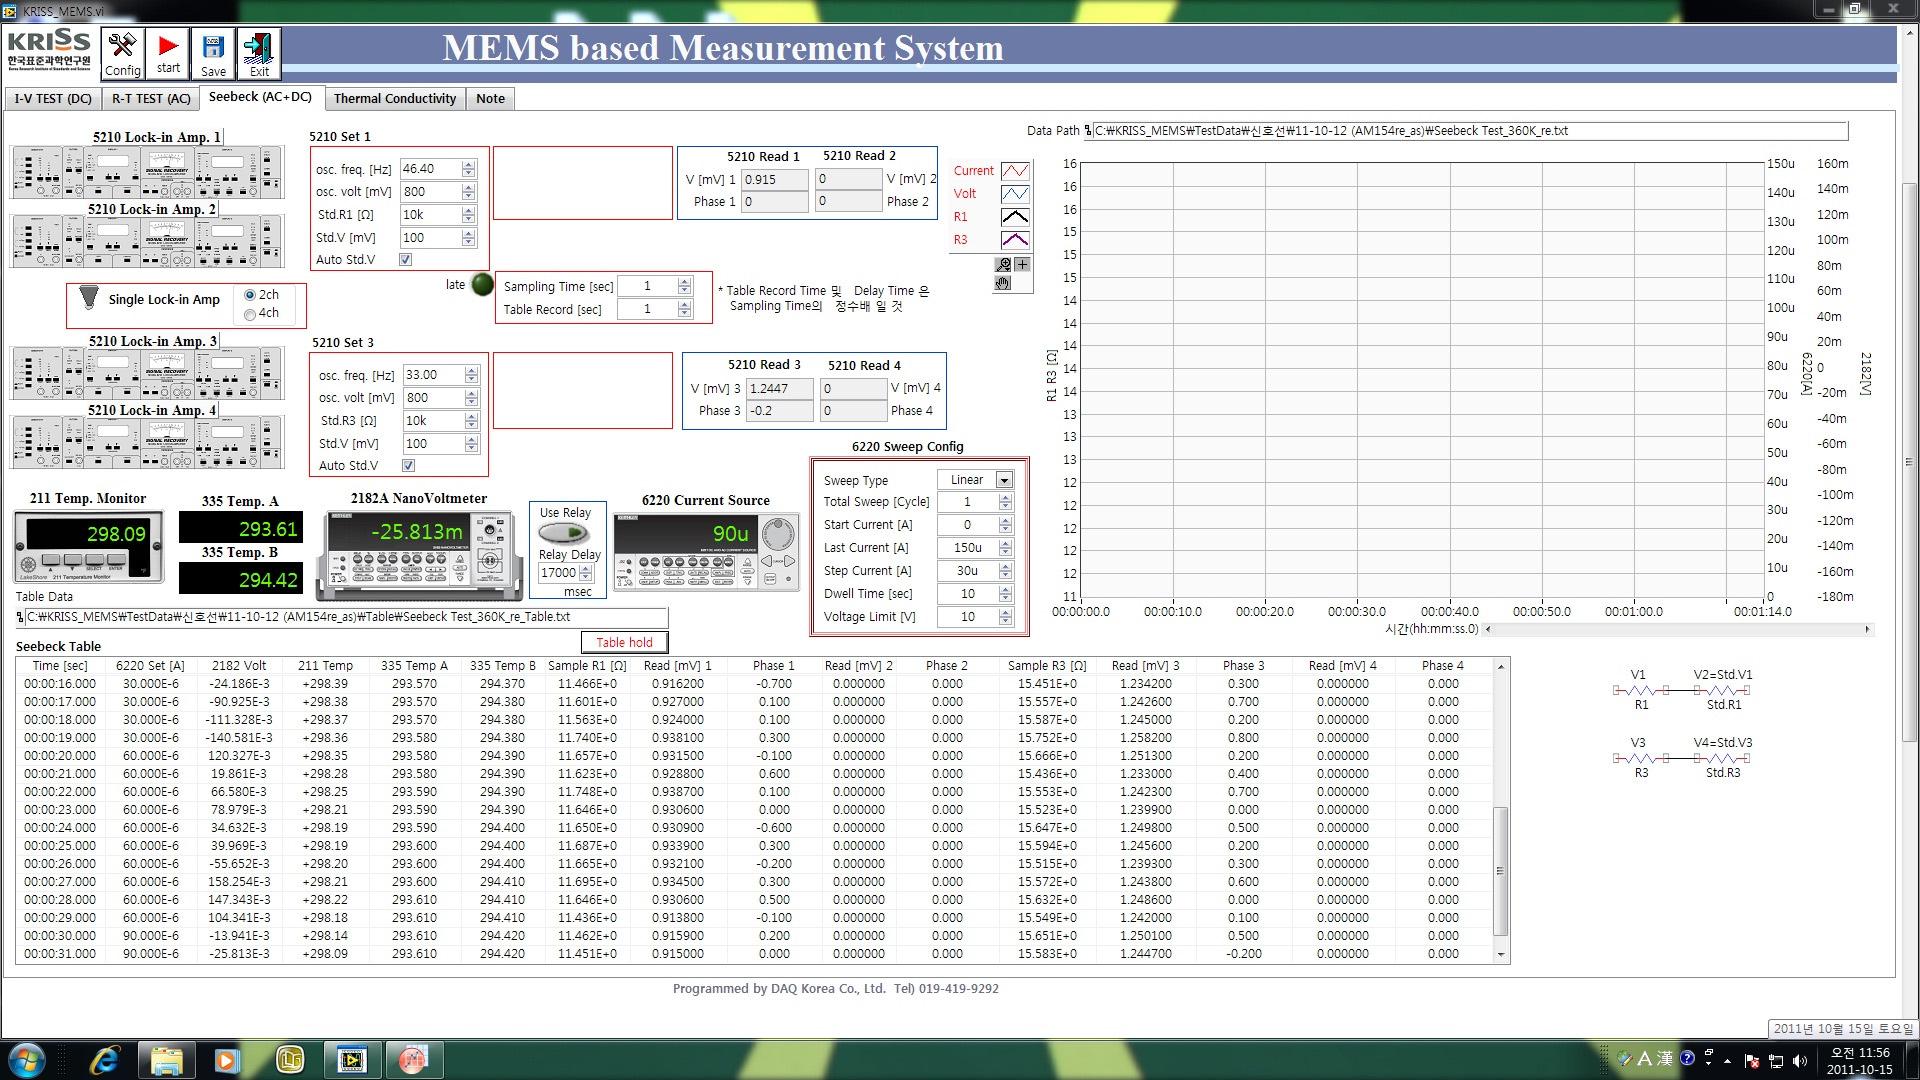 Software for the thermoelectric measurement based on MEMS chip. Seebeck coefficient, electrical conductivity, and thermal conductivity can be measured.